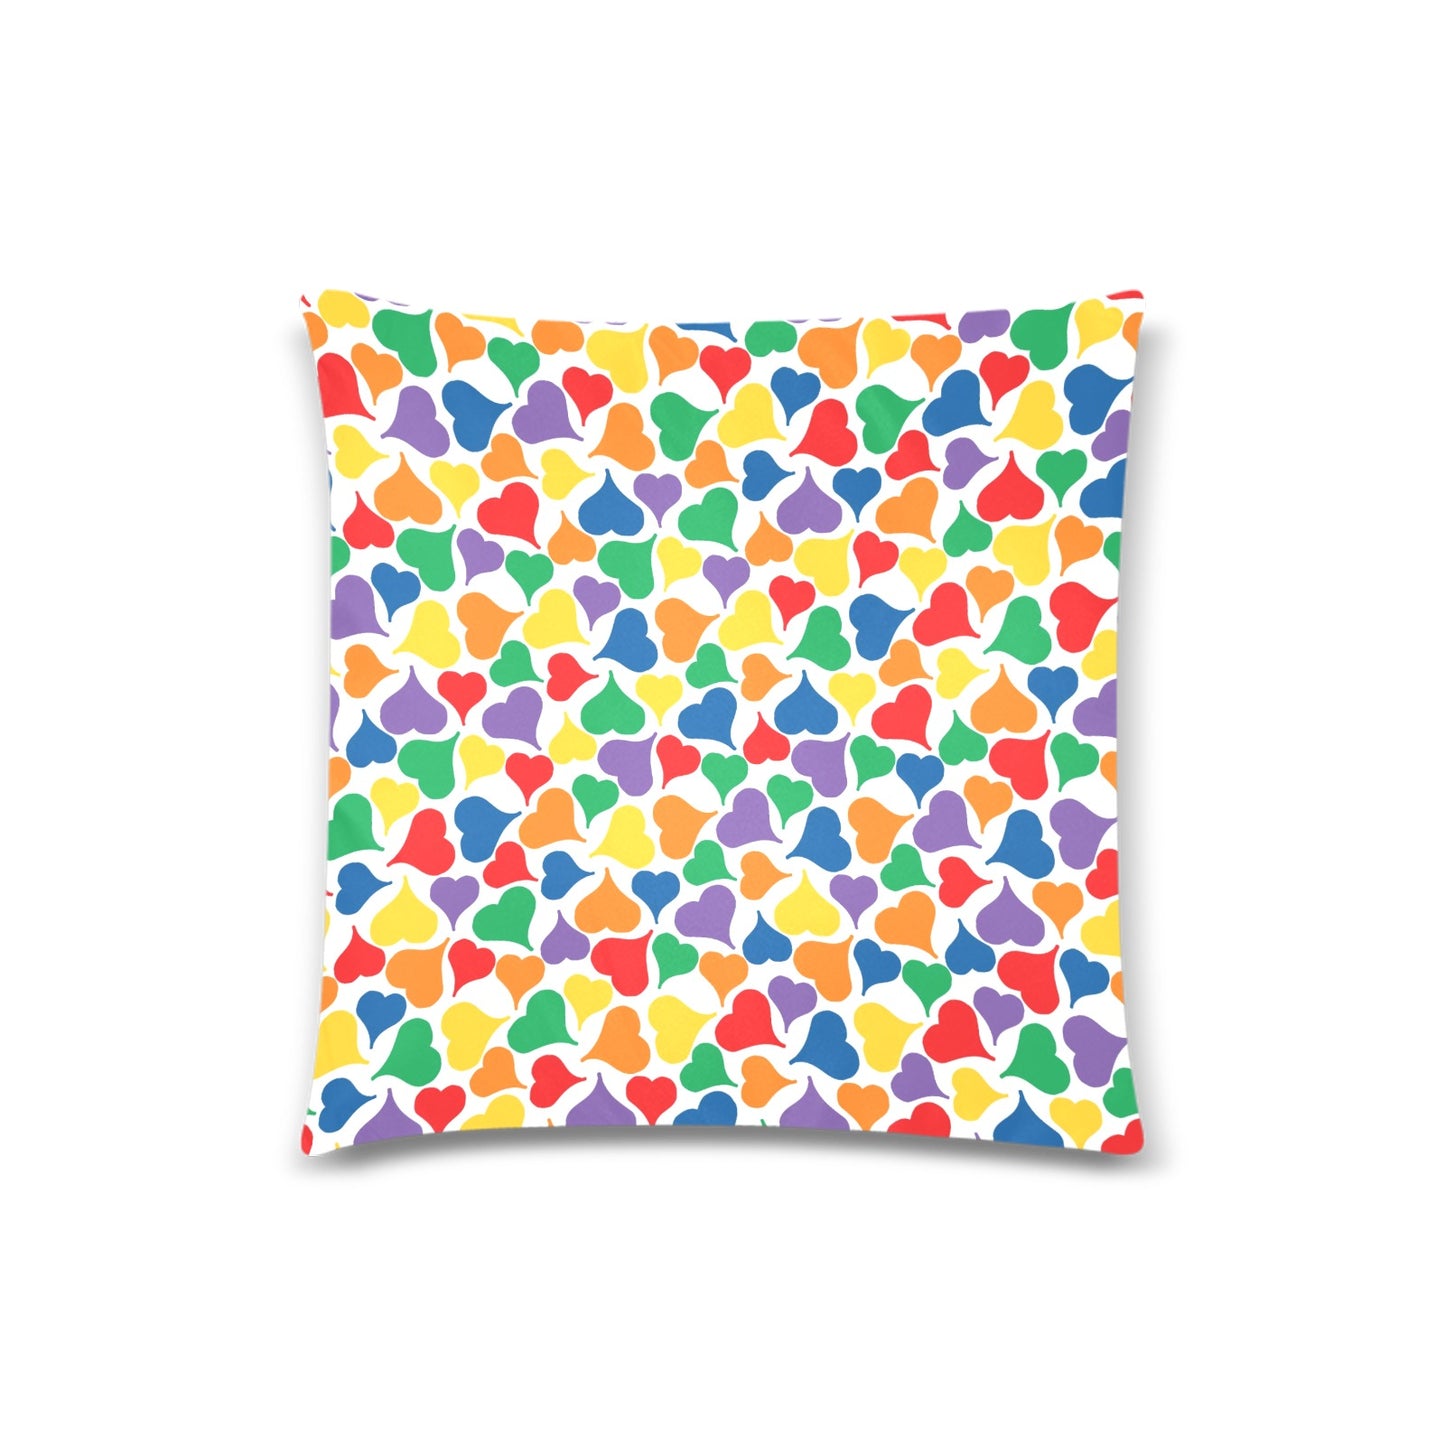 Colorful Hearts Throw Pillow Cover